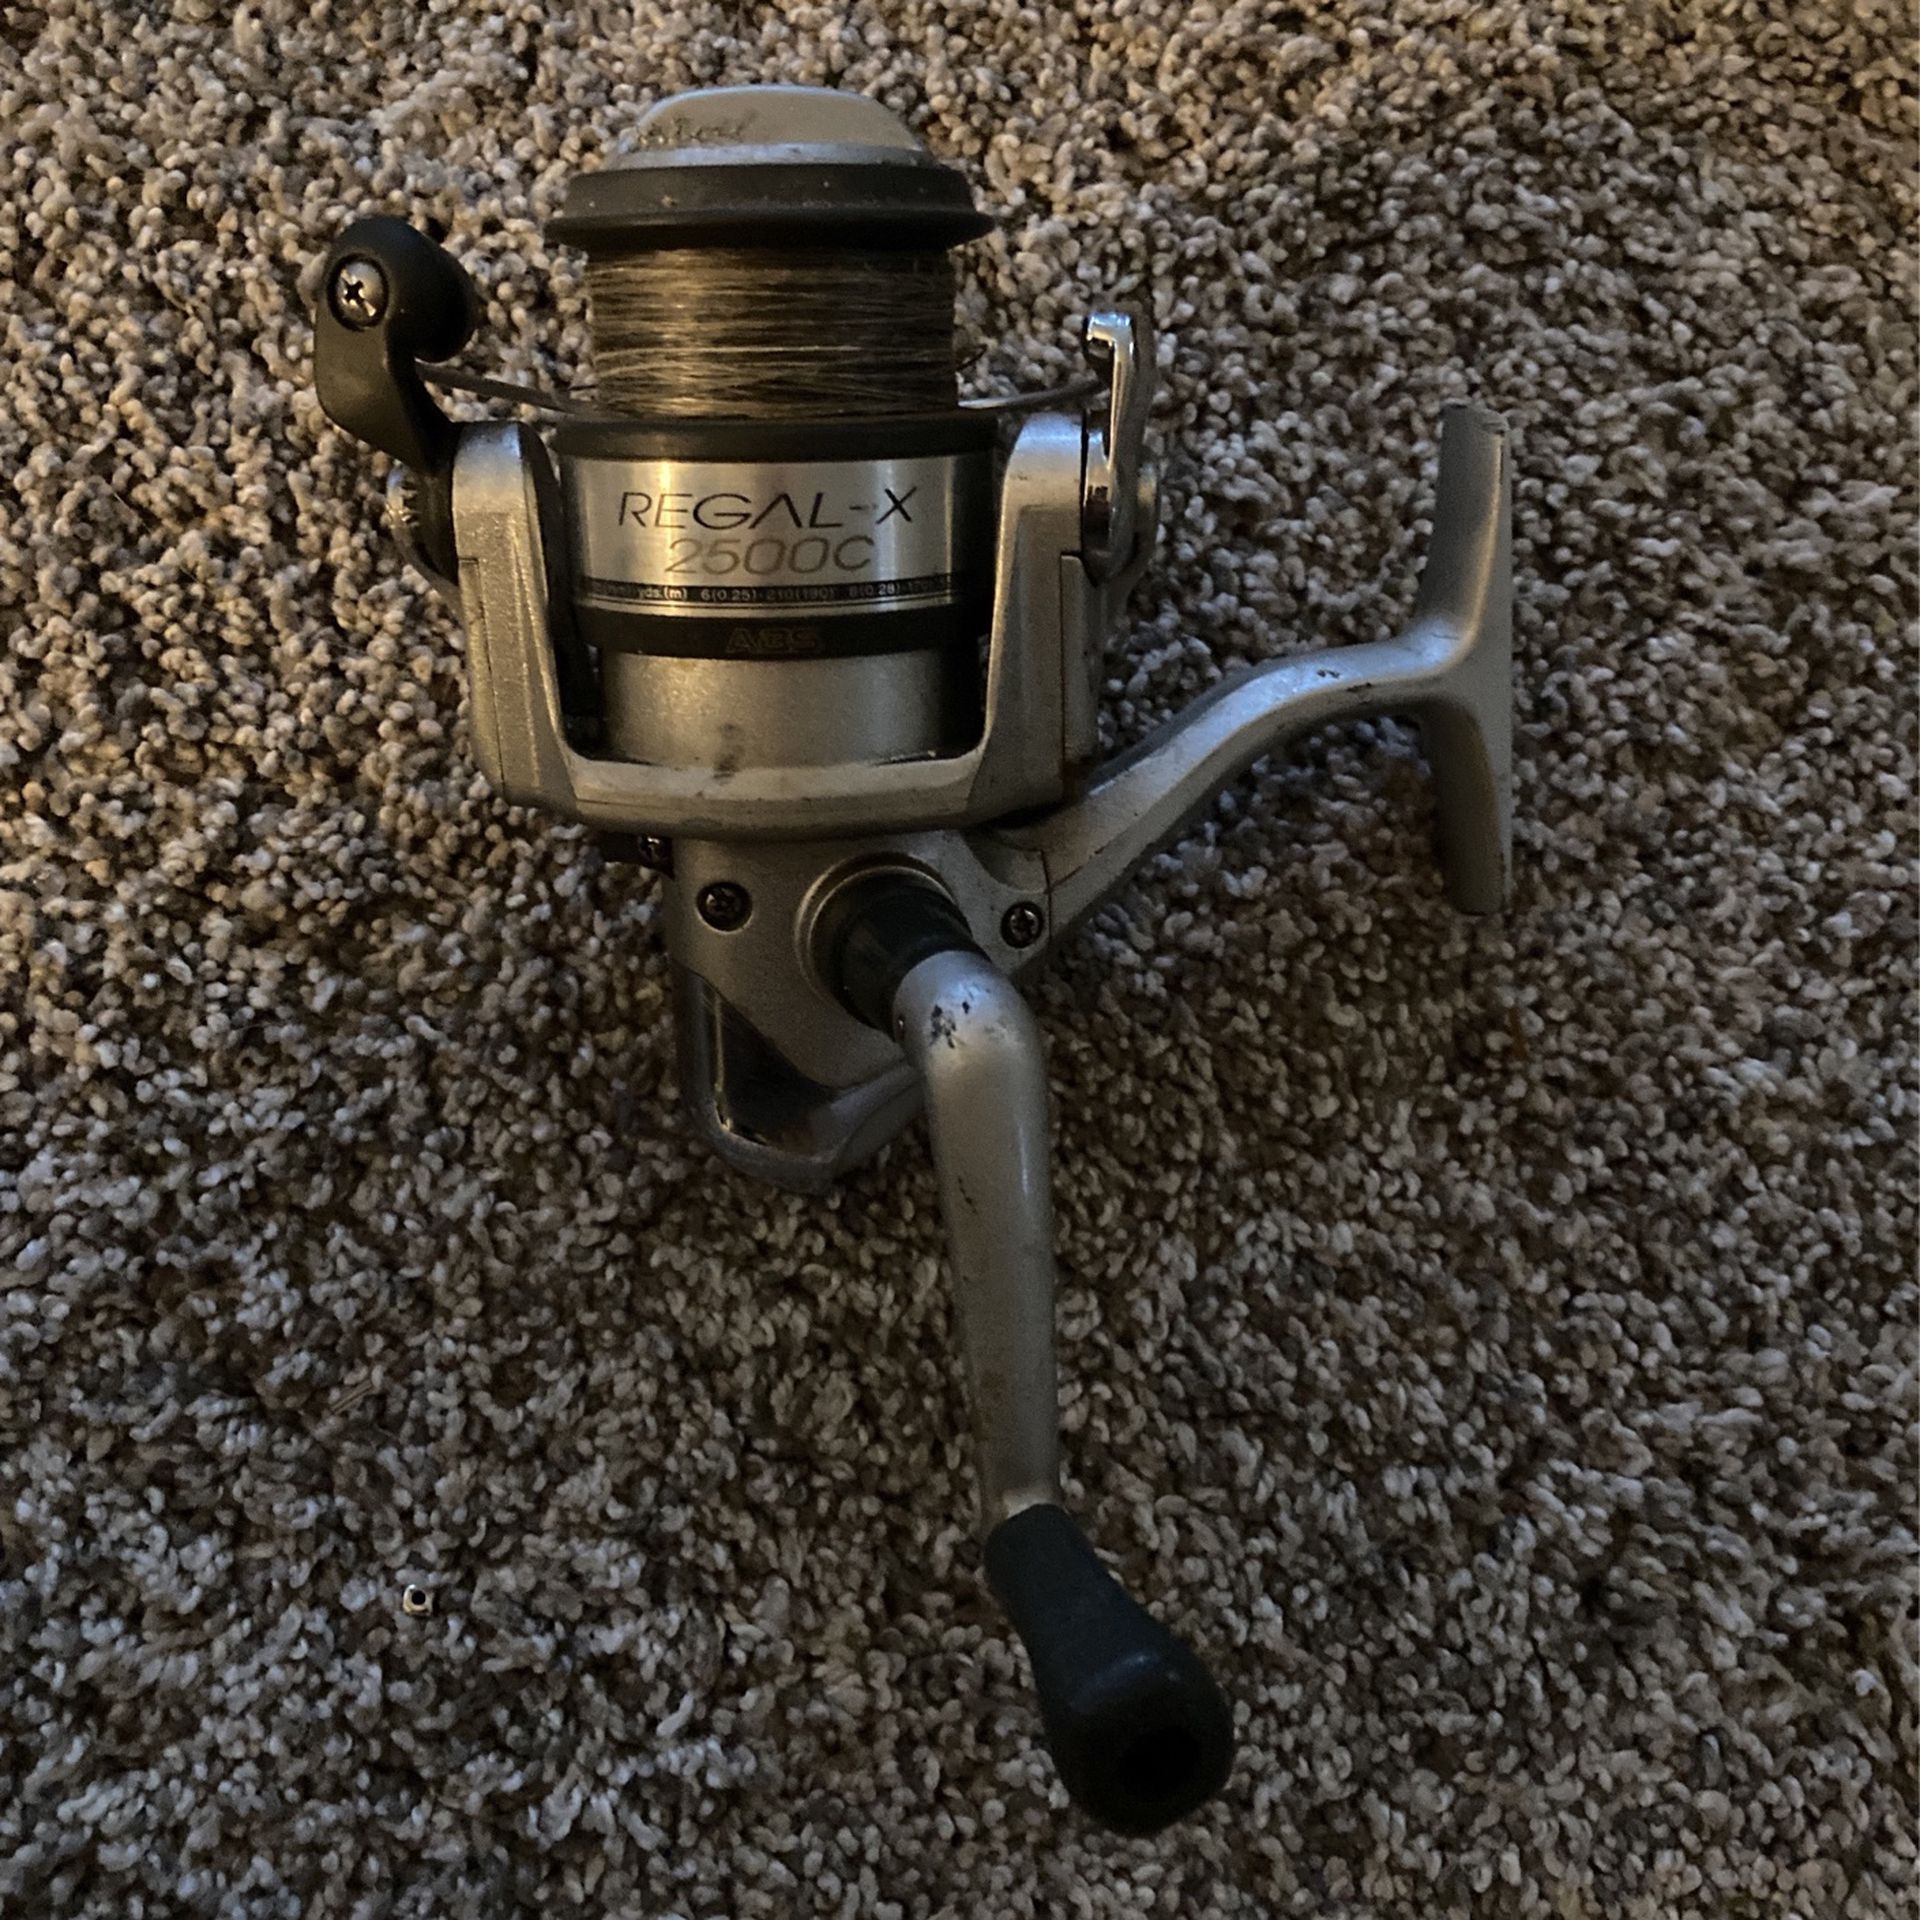 Regal 2500 reel In perfect condition